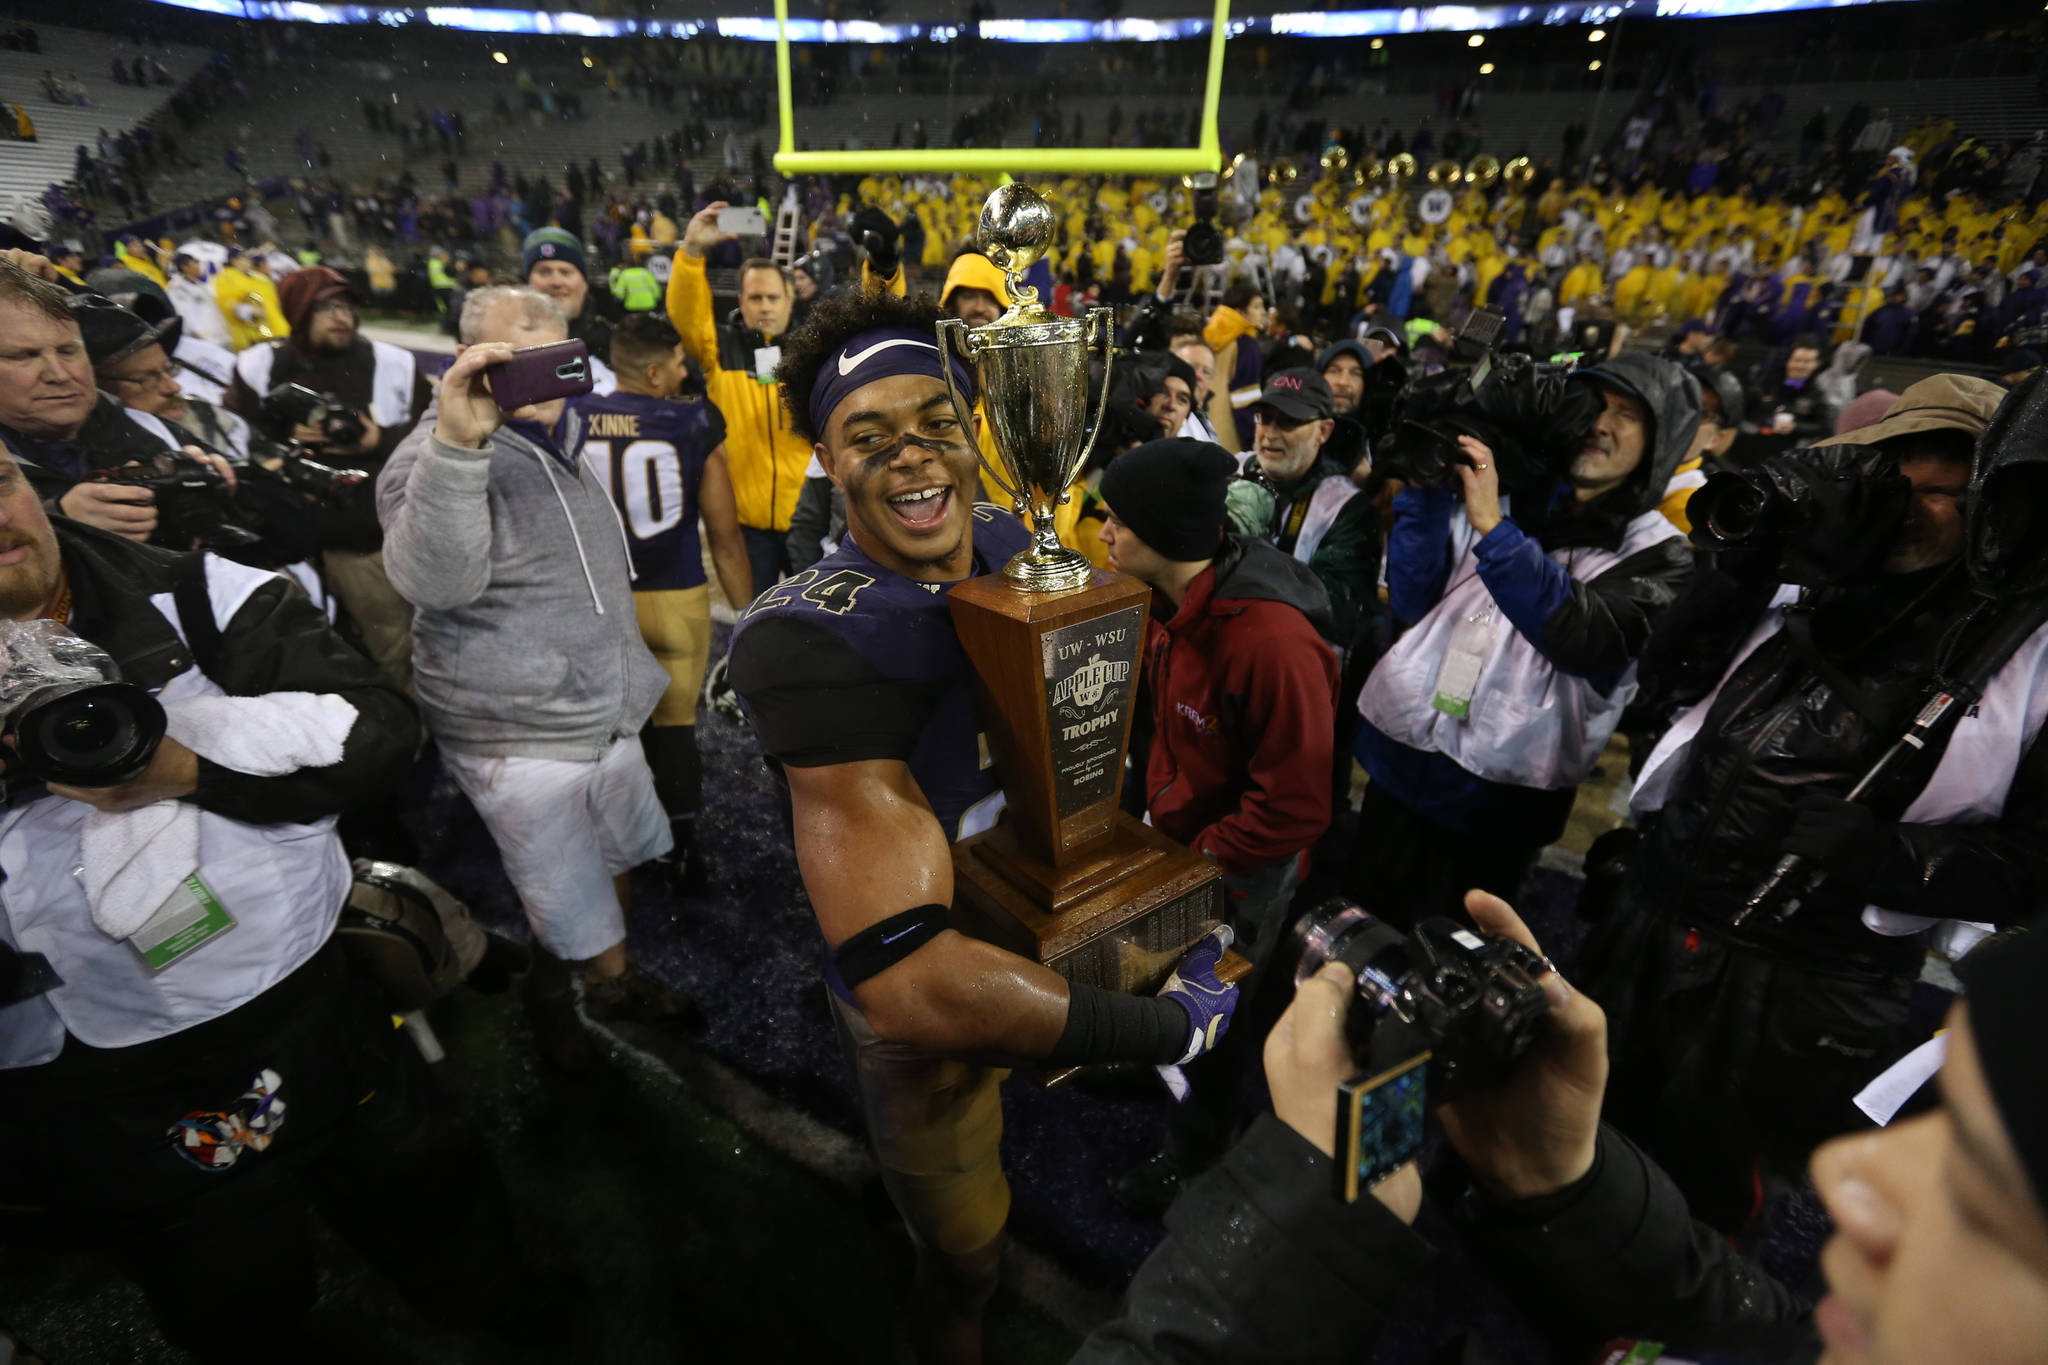 Washington Huskies defensive back Ezekiel Turner holds the Apple Cup trophy after the Washington State Cougars lost to the Washington Huskies 41-14 at Husky Stadium in the 110th Apple Cup on Saturday, Nov. 25, 2017 in Seattle, Wa. (Andy Bronson / The Herald)